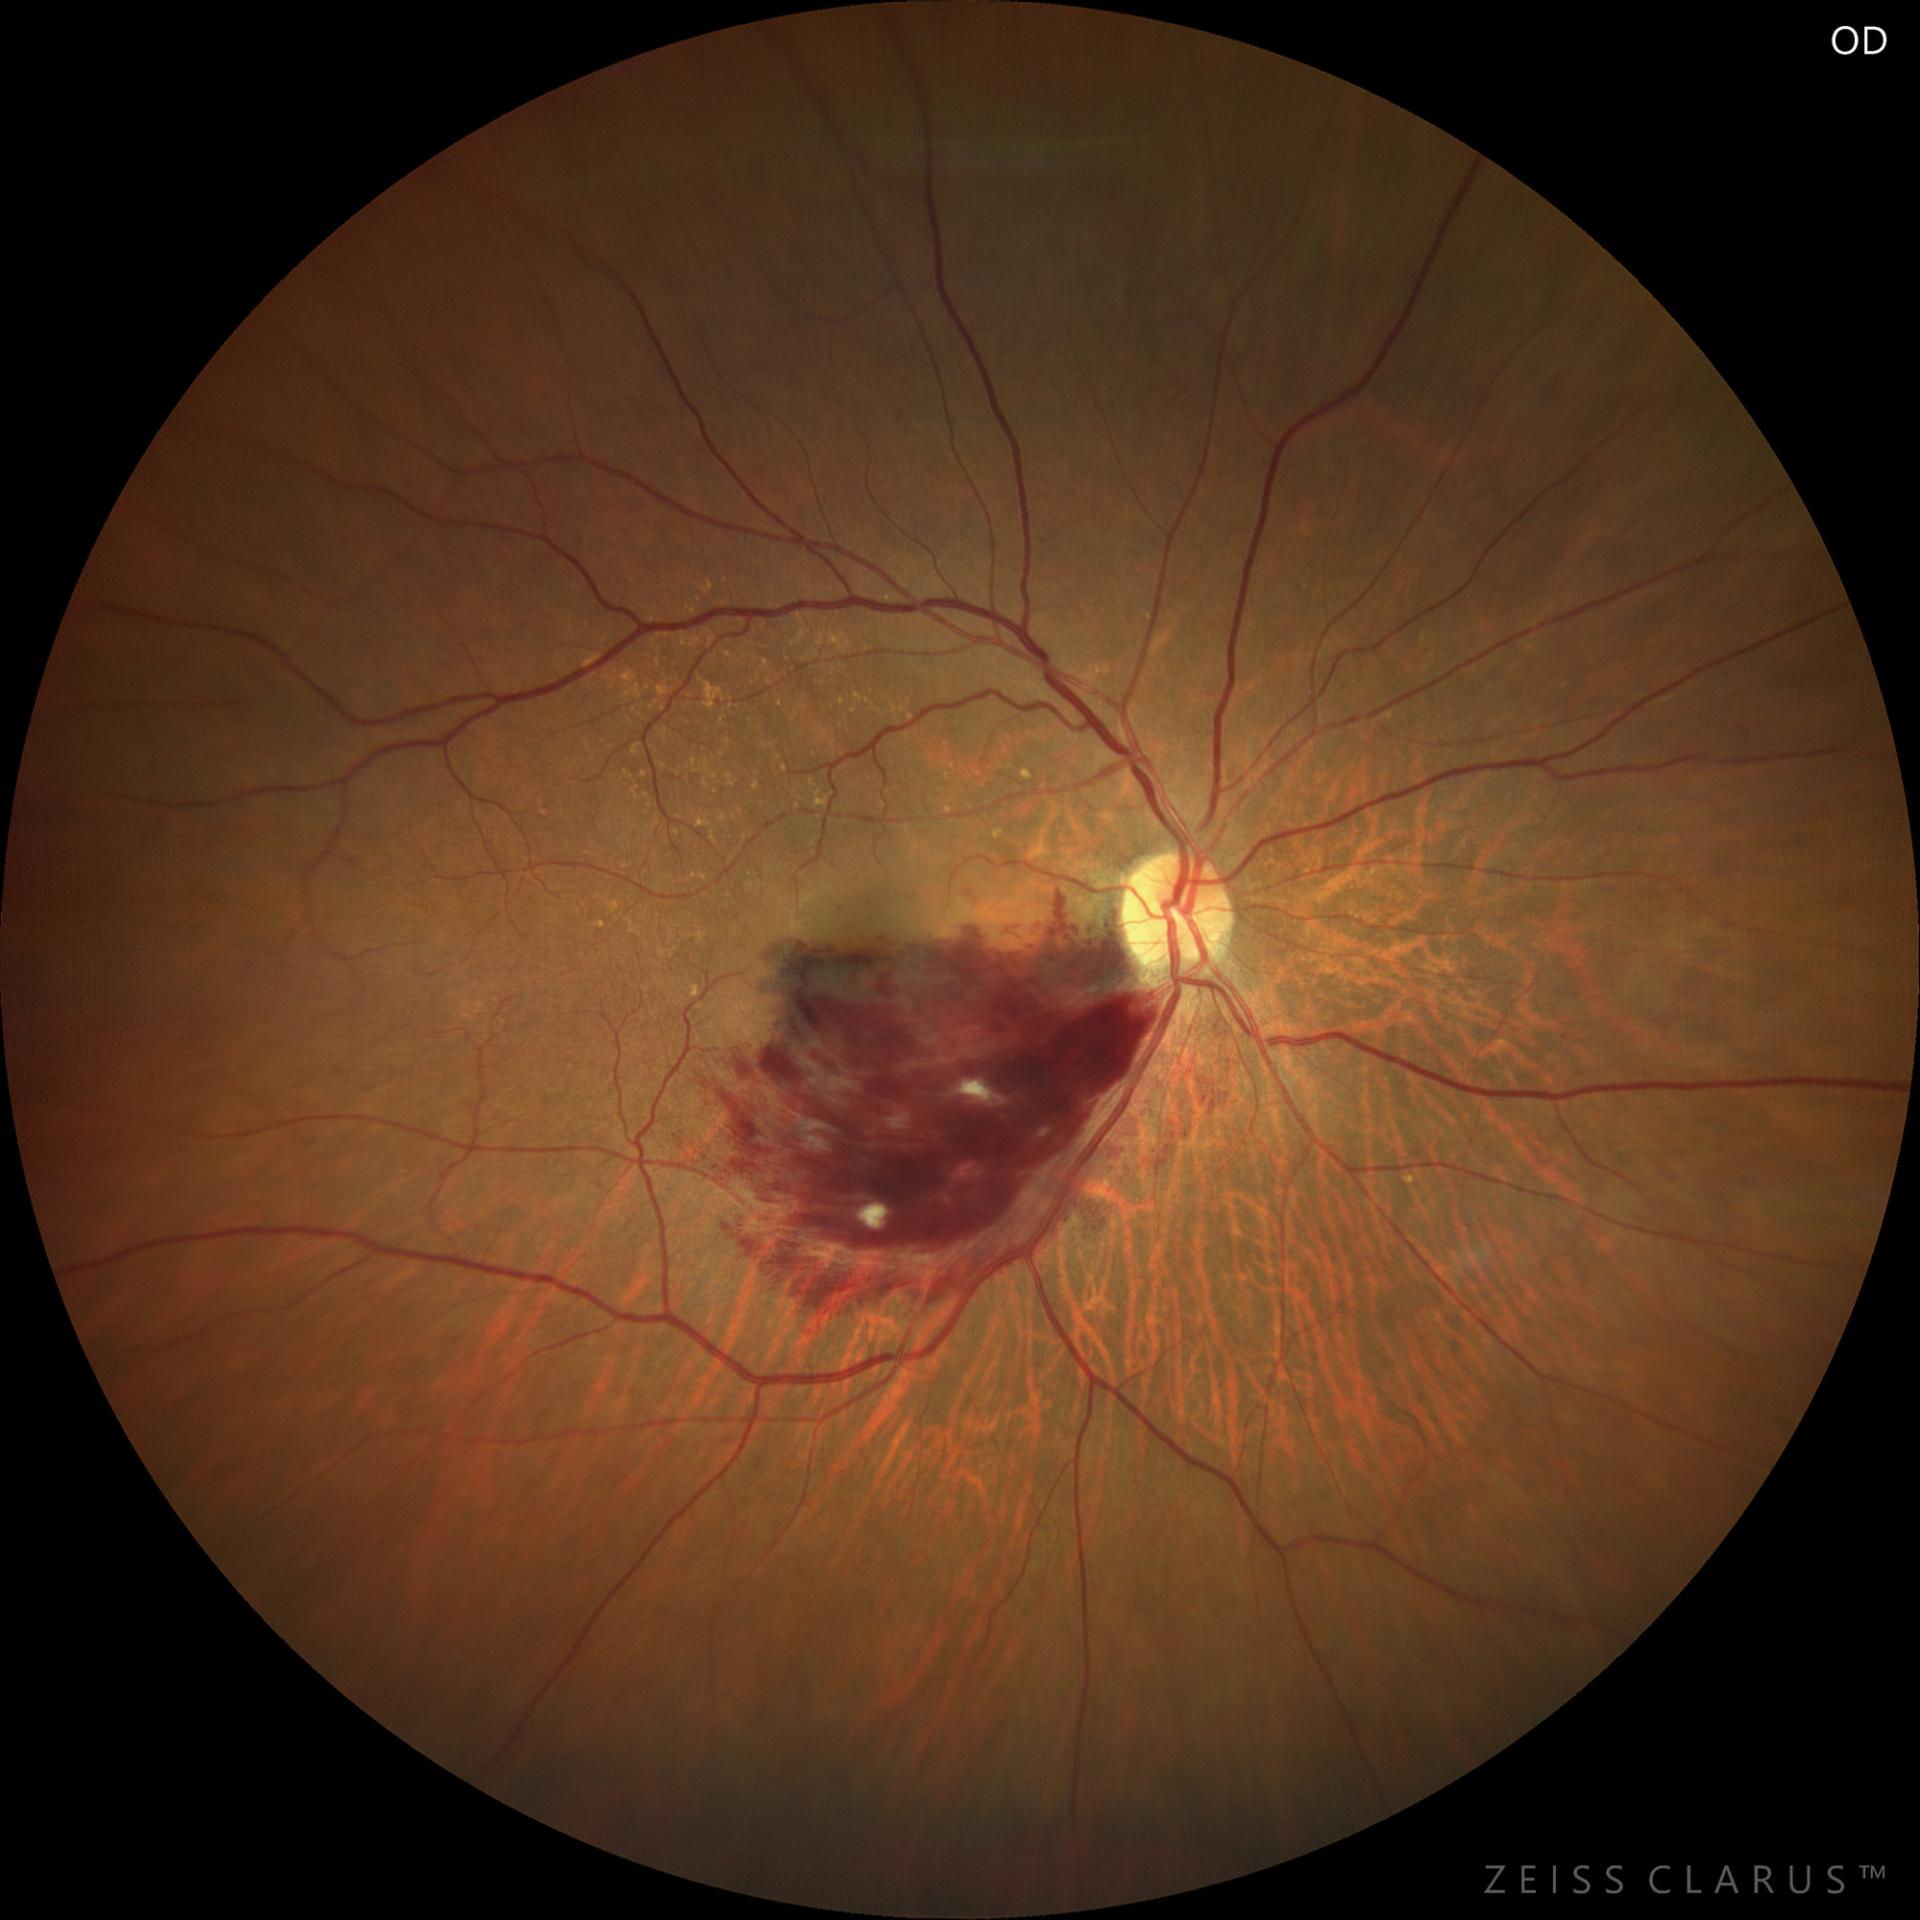 WF 133° magnified image of the macula. Retinal hemorrhages (flame-shaped hemorrhages) fanning out below the macula and soft leukocoria observed within the hemorrhages.